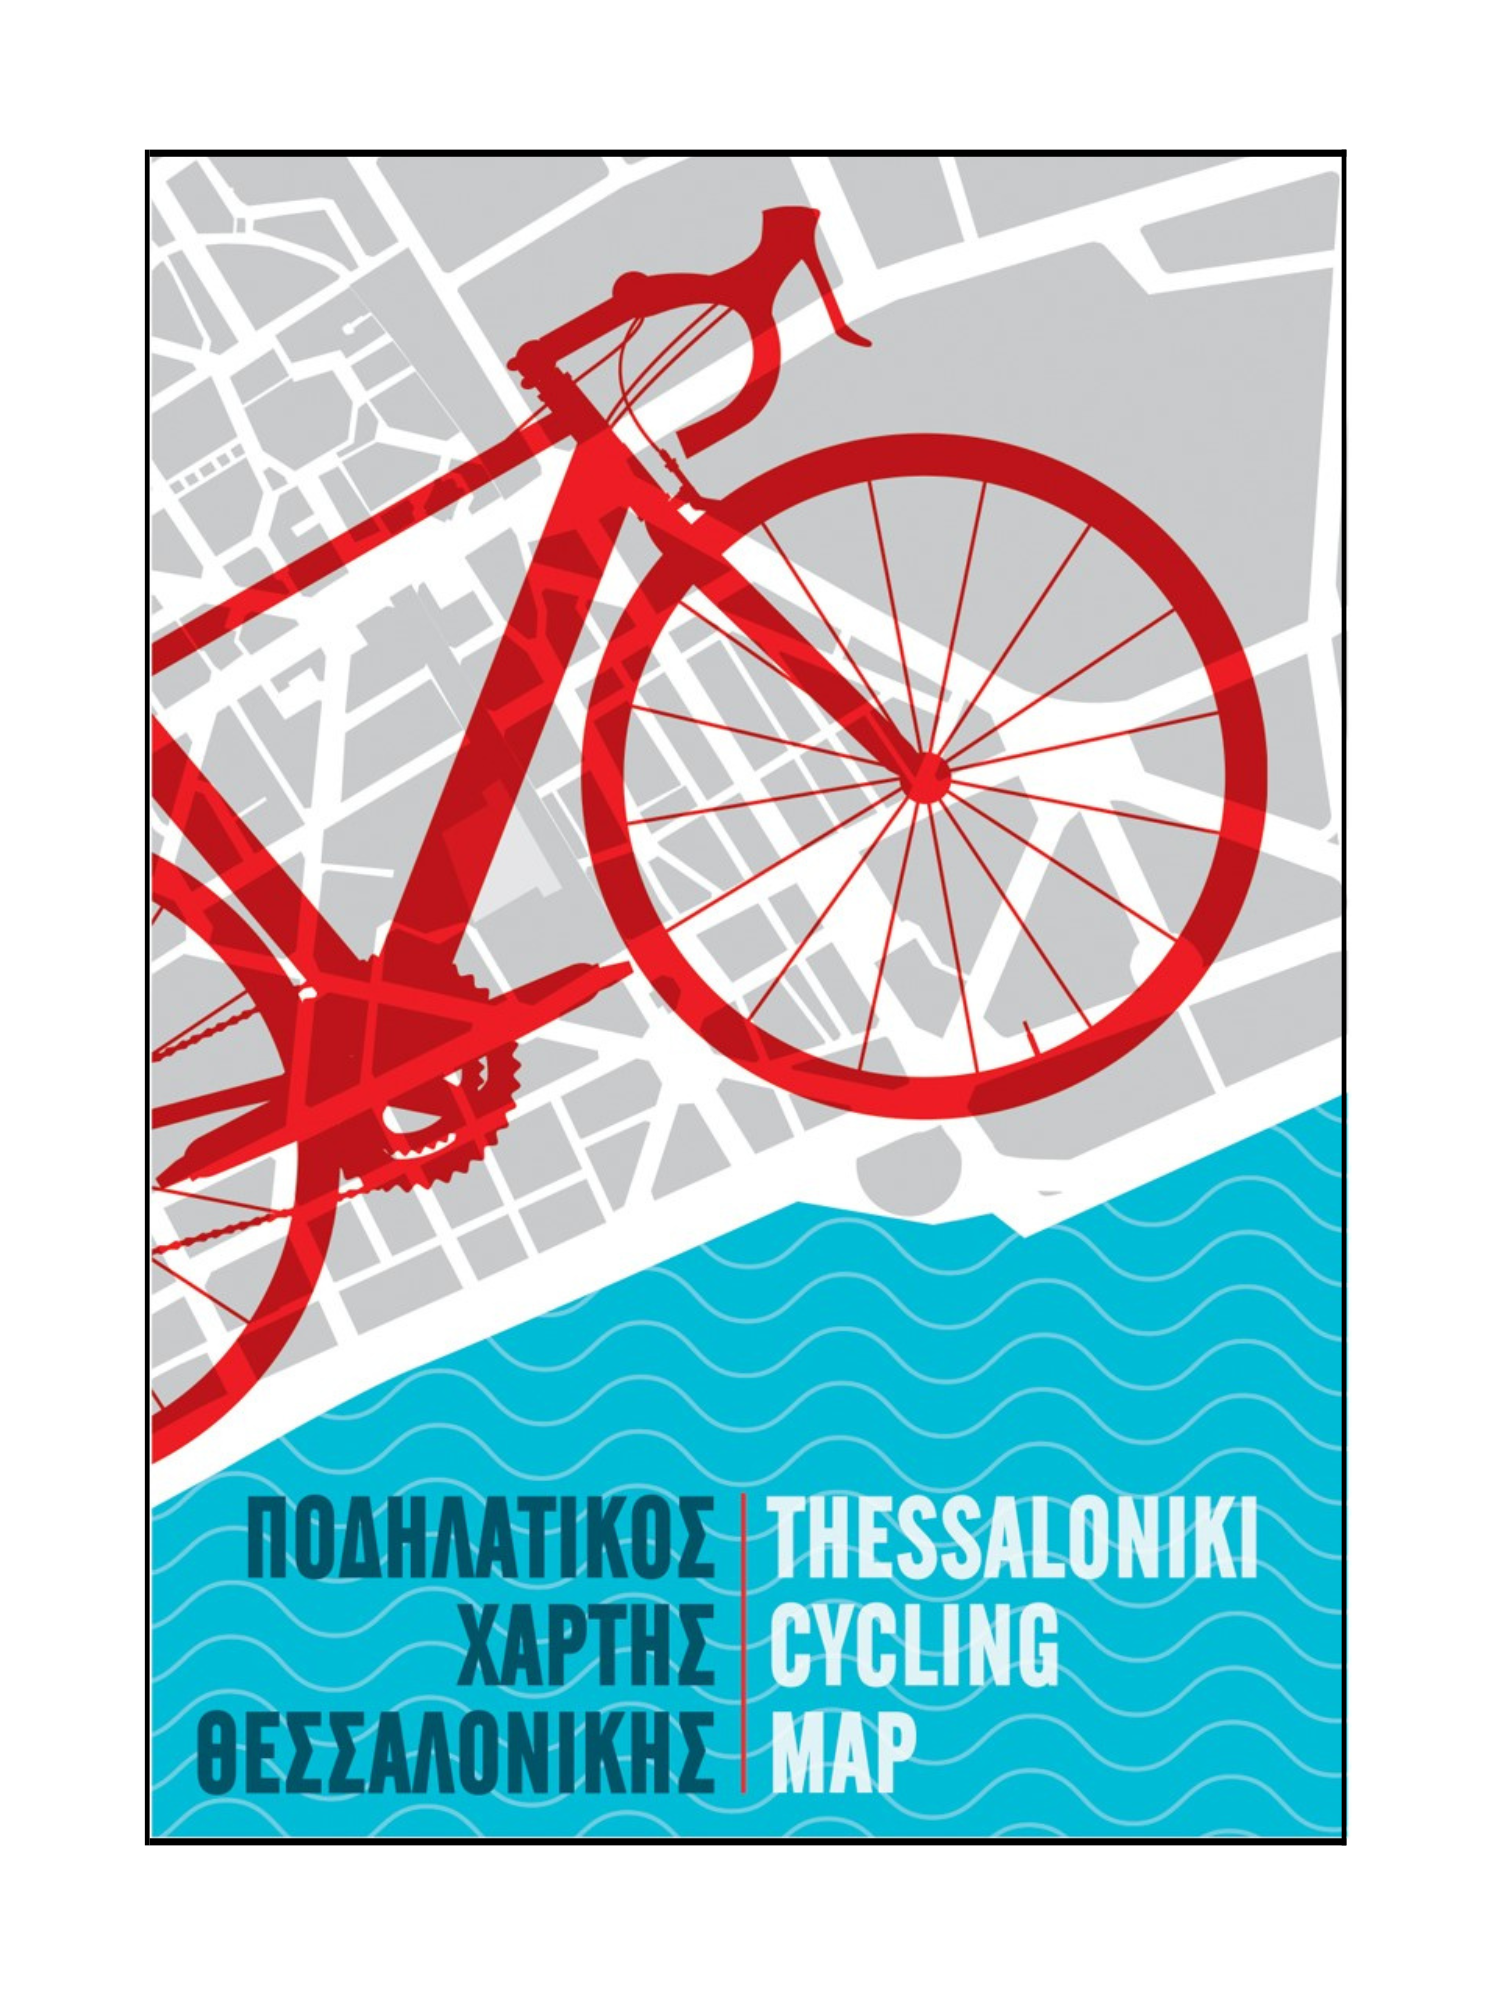 An illustration of the Thessaloniki Cycling Map